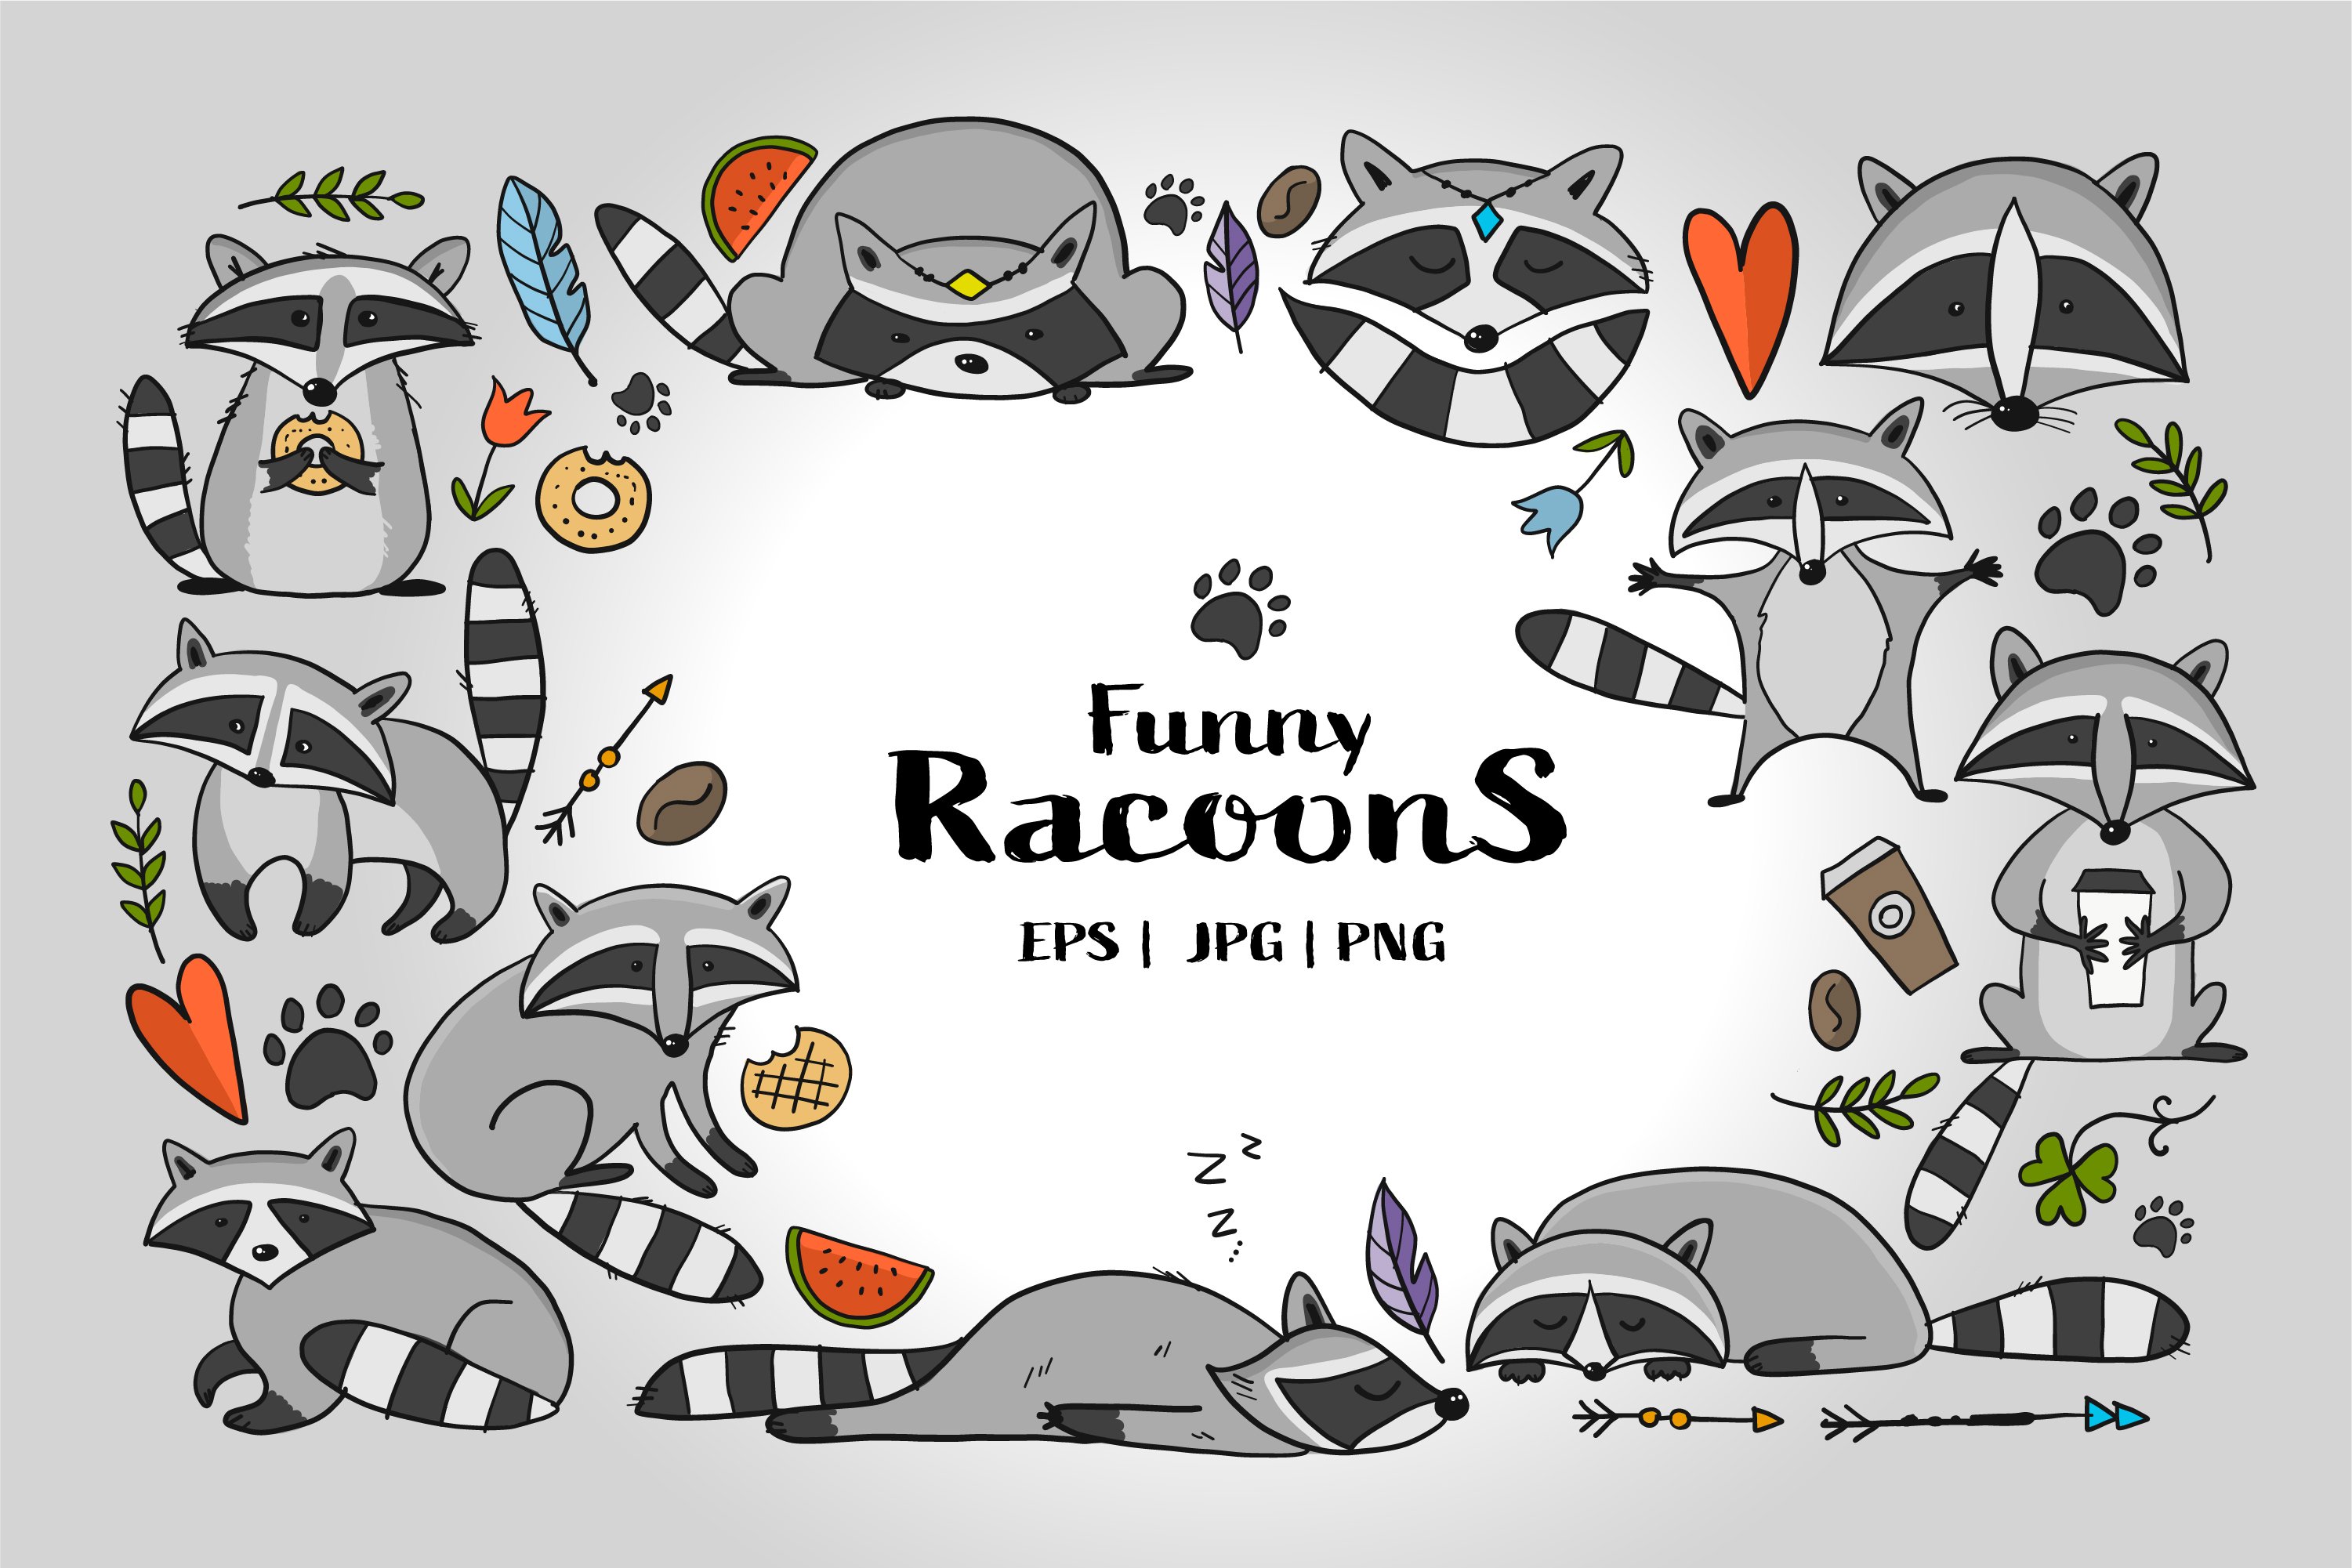 Racoons Family. Funny Characters cover image.